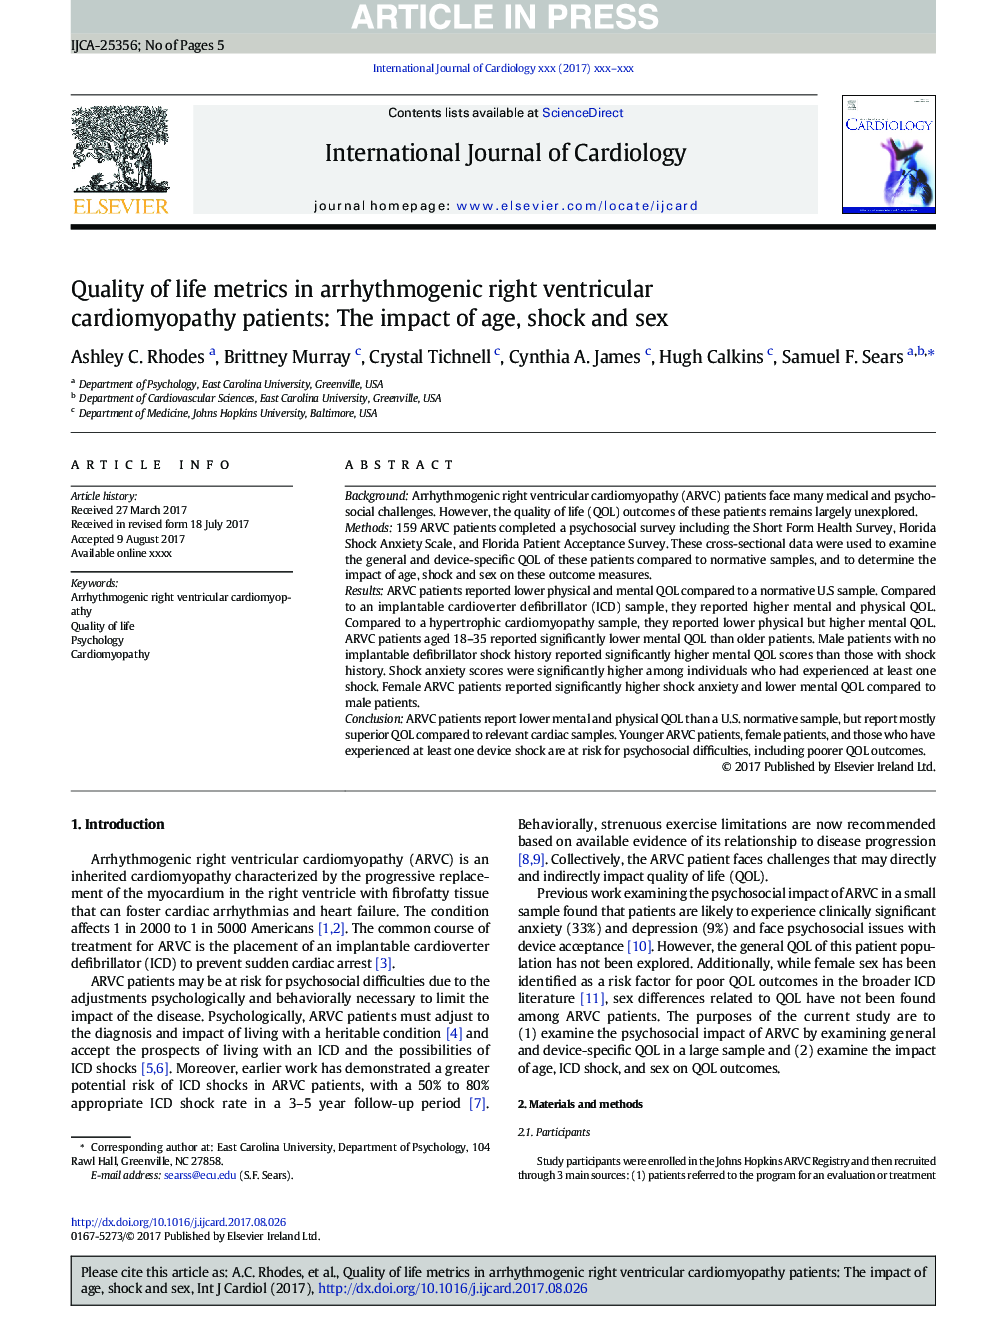 Quality of life metrics in arrhythmogenic right ventricular cardiomyopathy patients: The impact of age, shock and sex